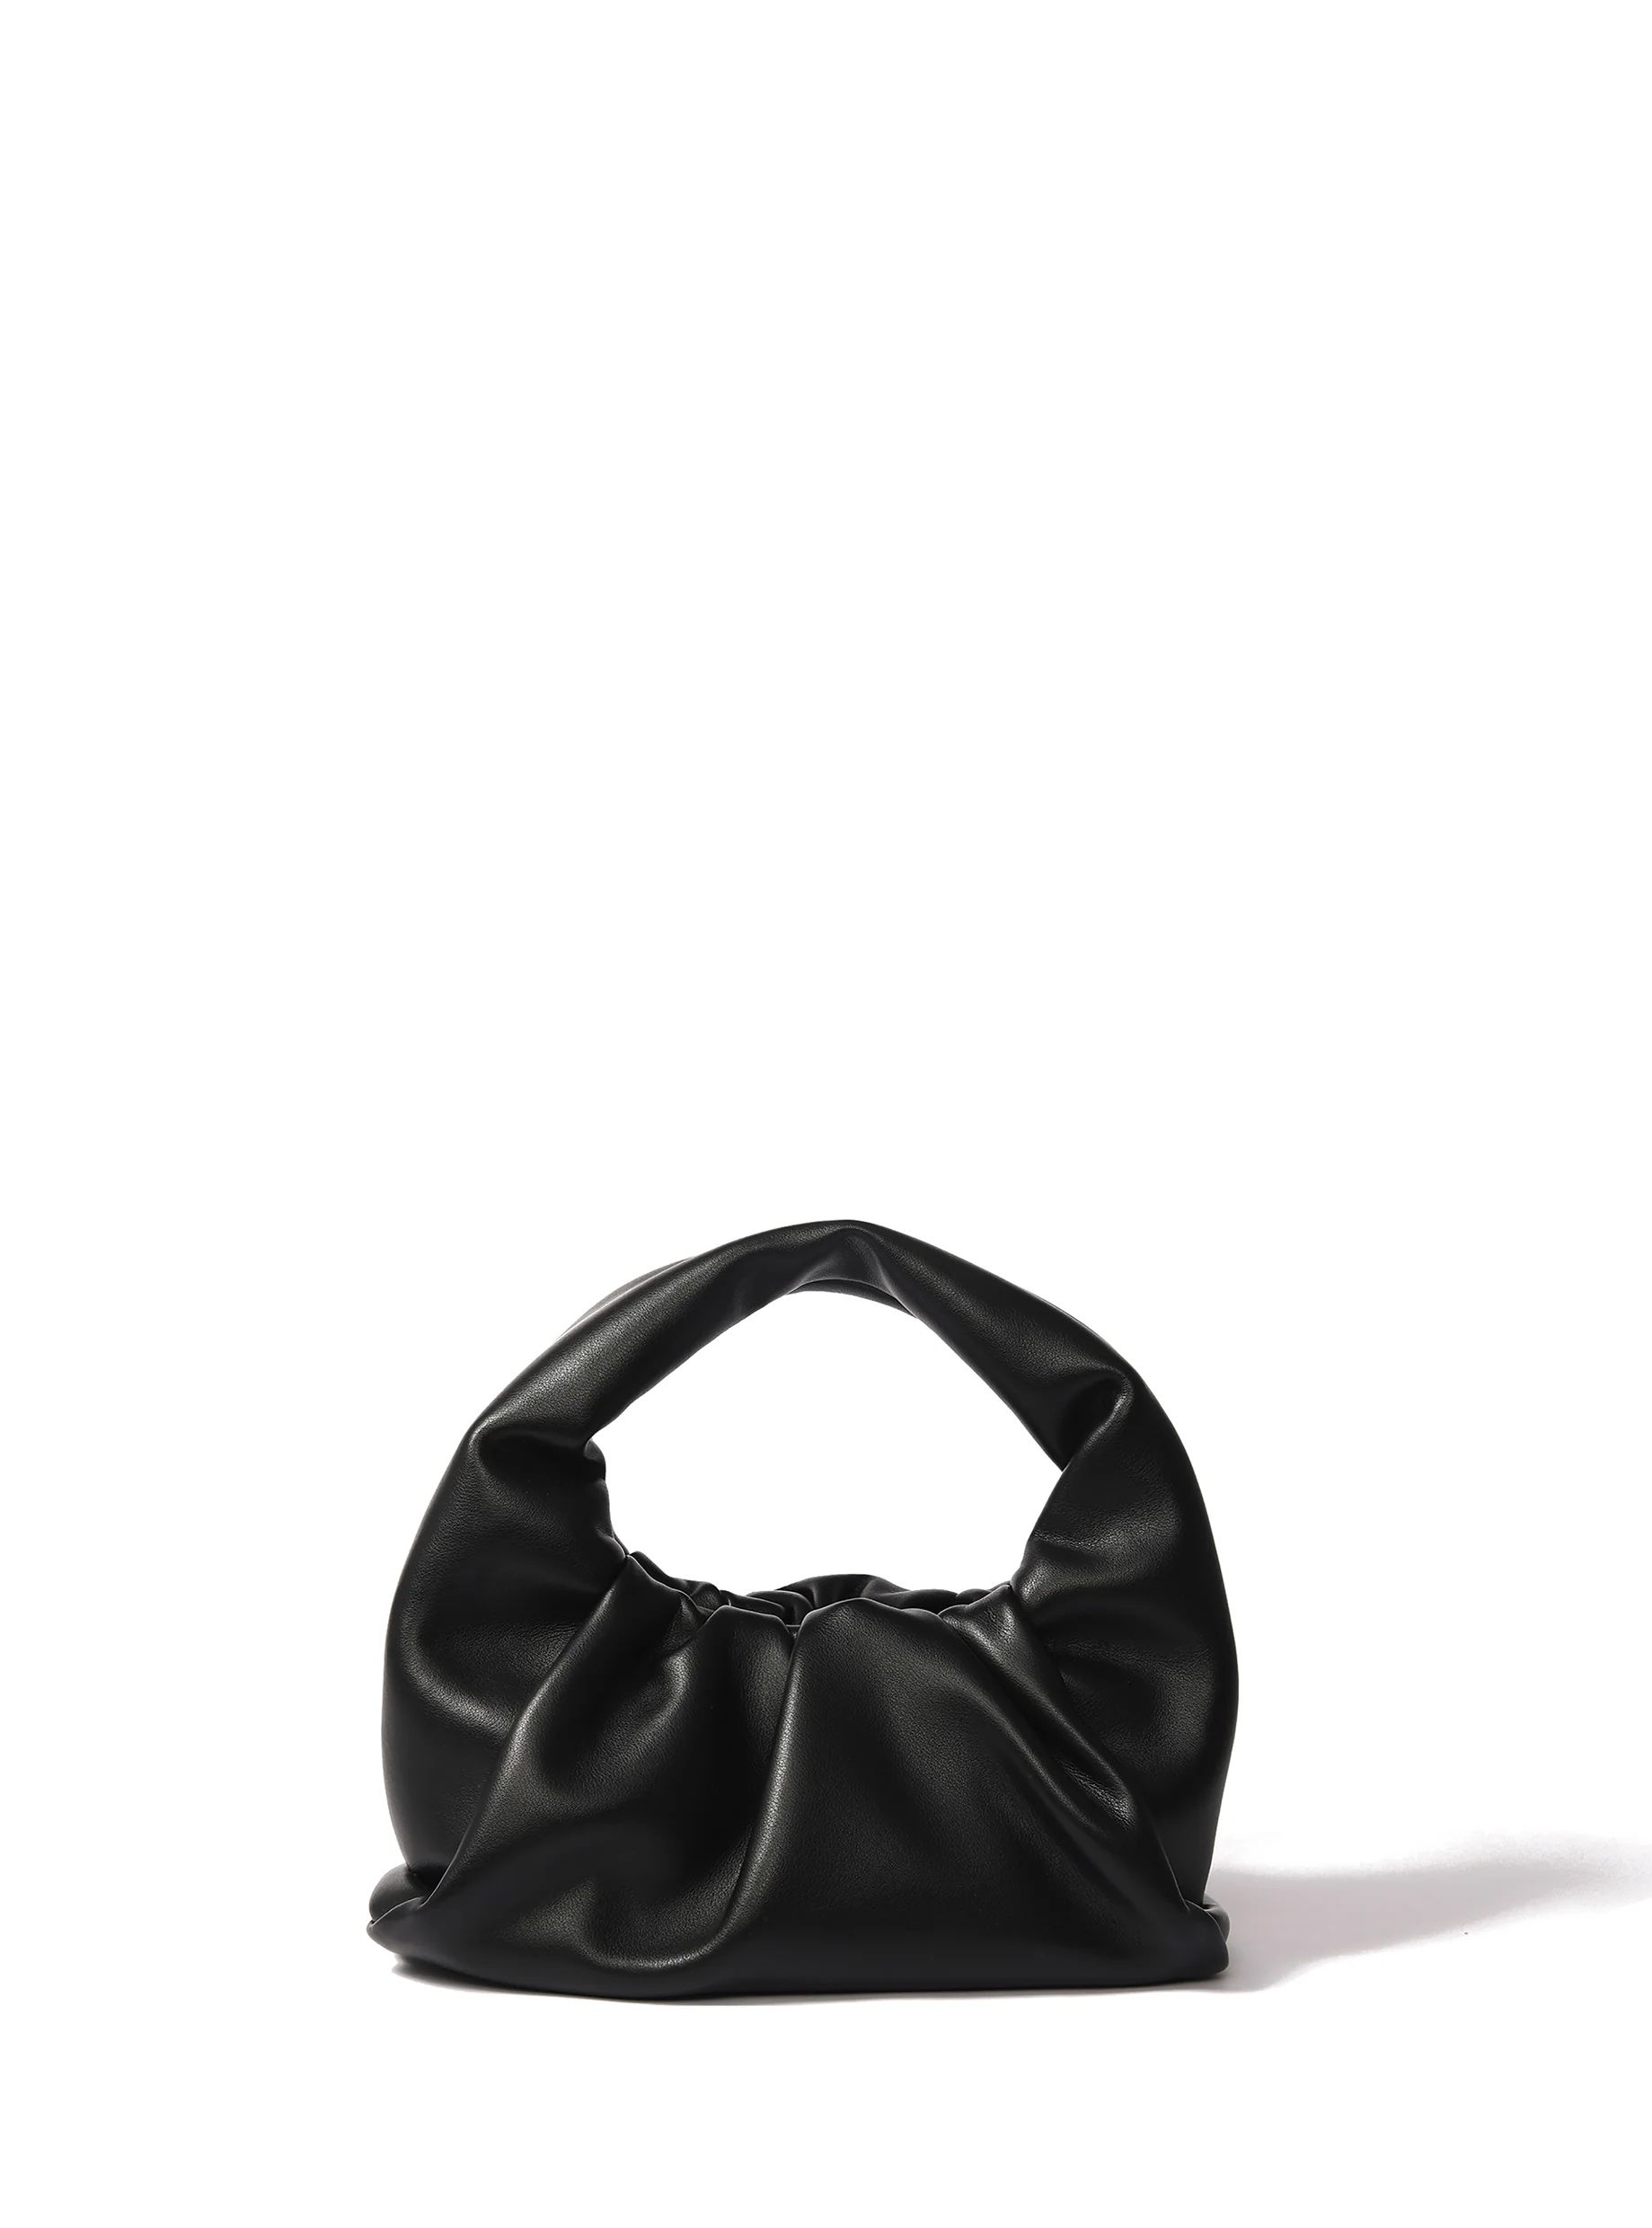 Marshmallow Croissant Bag in Soft Leather, Black | Bob Ore Blue Collection